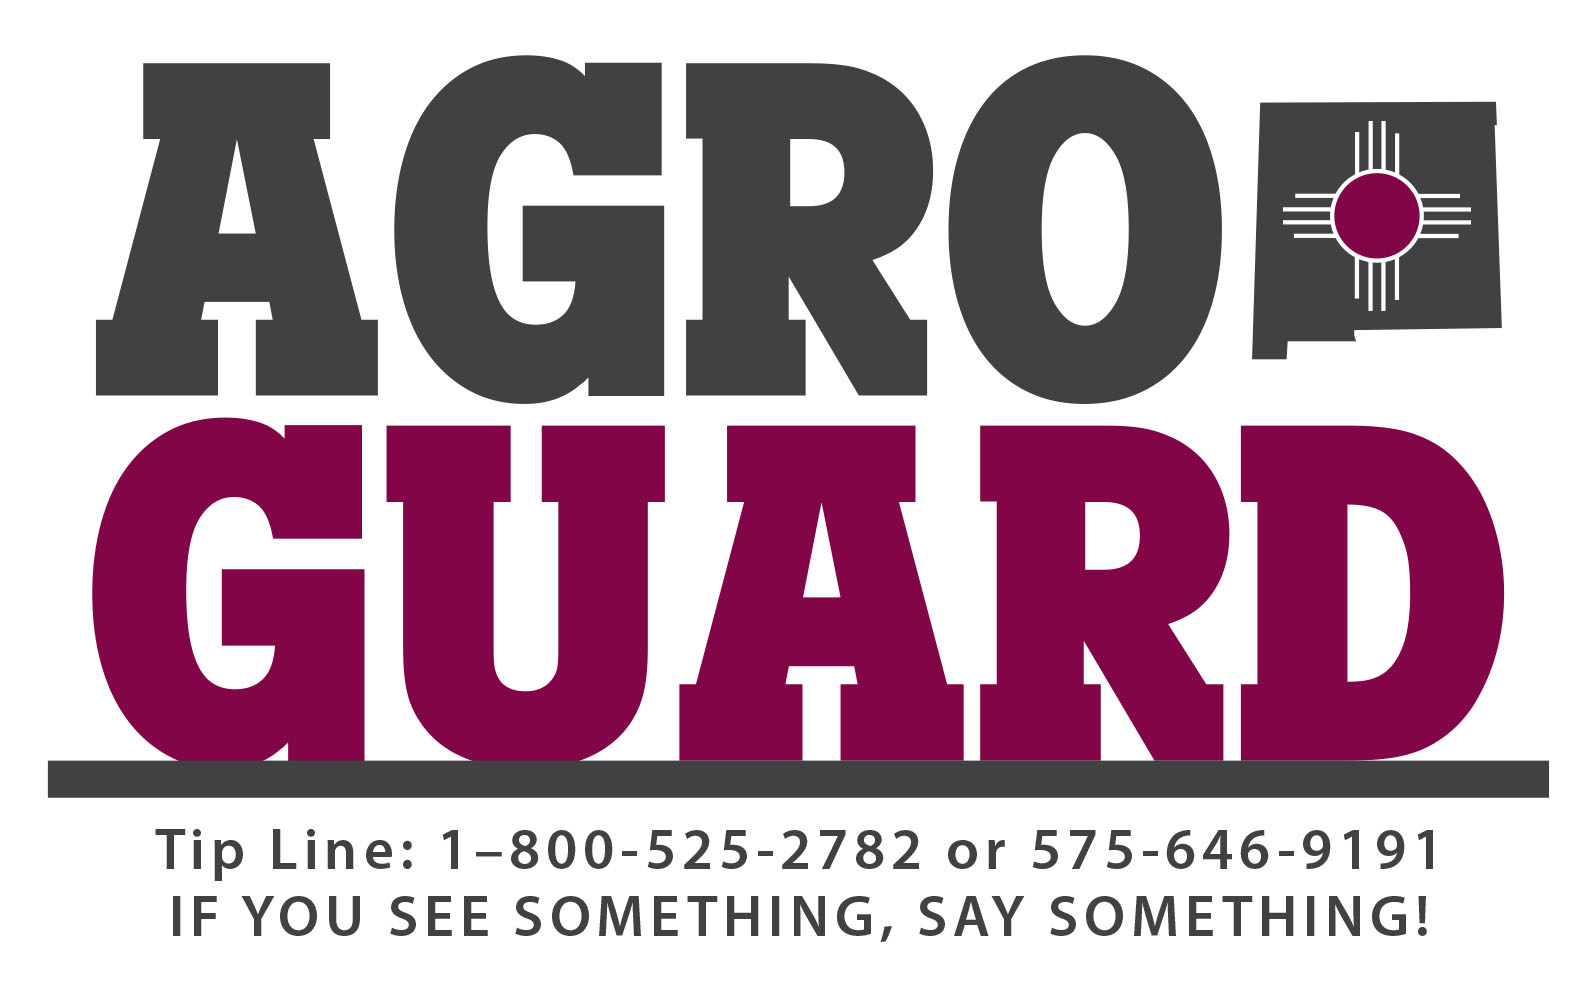 agro-guard tip line. If you see something, say something. Call 1 800 five two five two seven eight two or five seven five six four six nine one nine one.